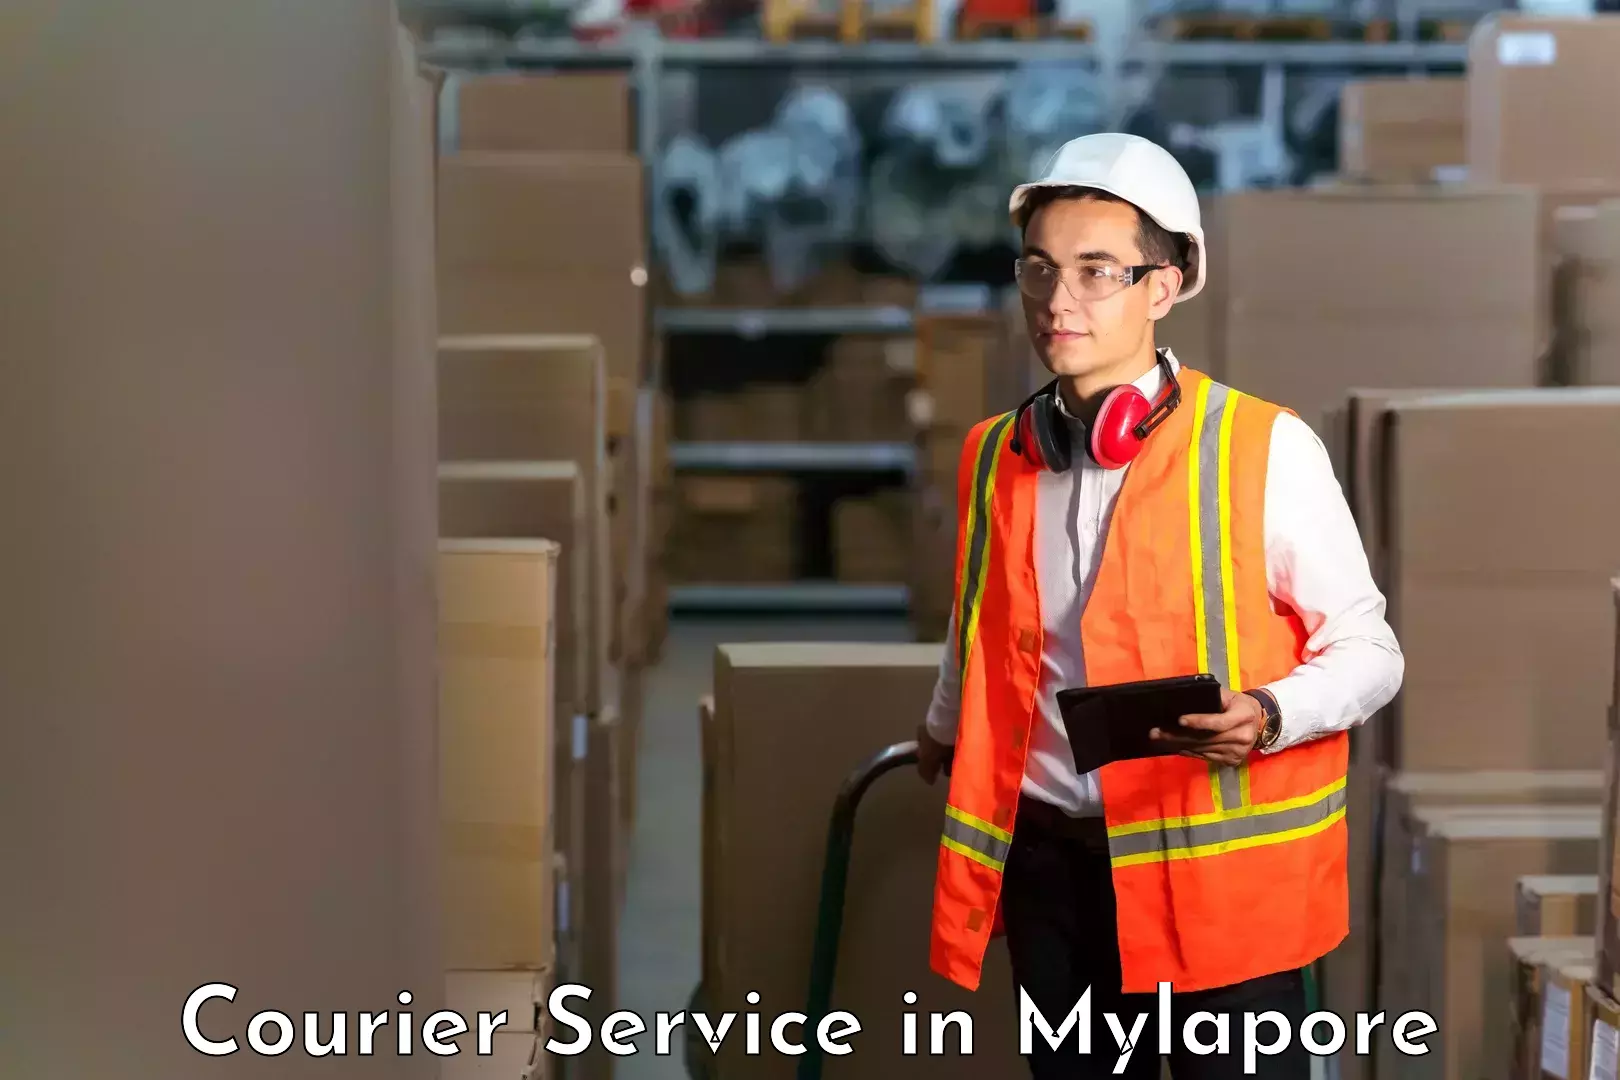 Customer-friendly courier services in Mylapore